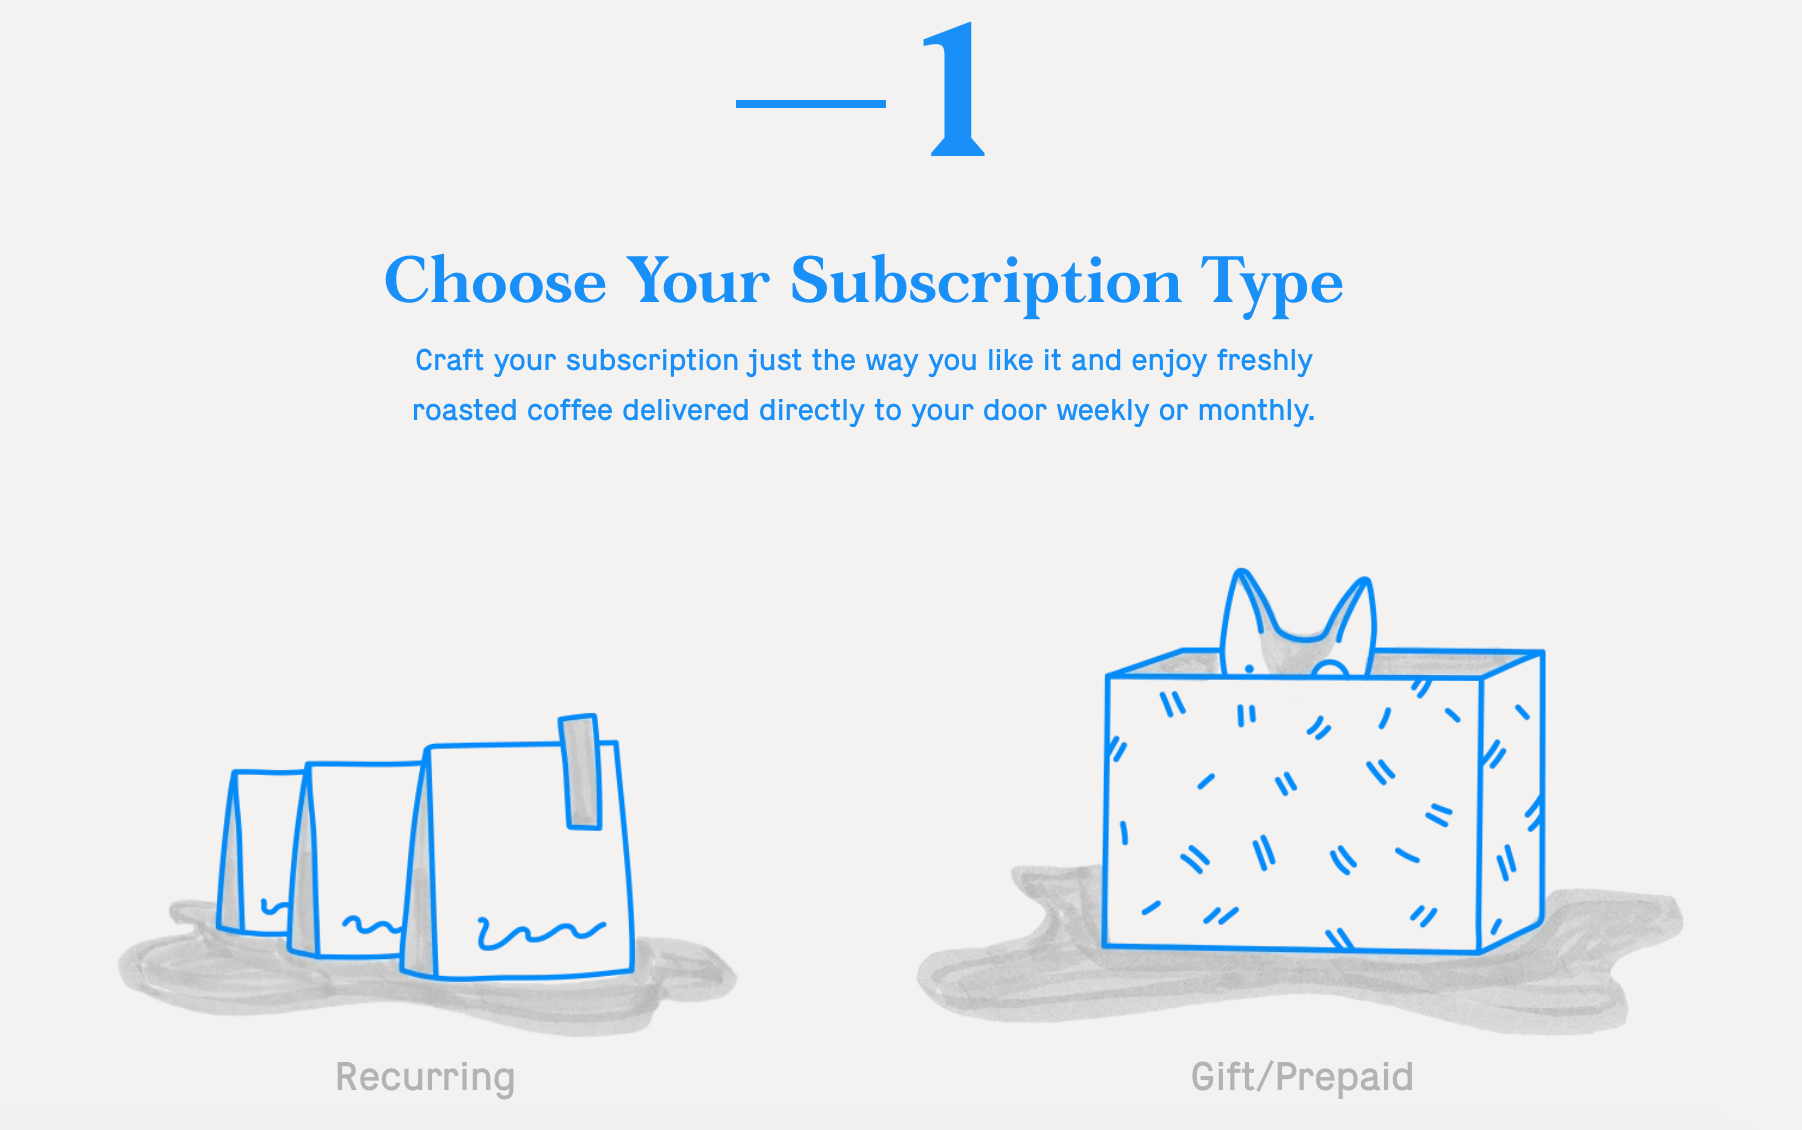 Recurring vs. gift subscription shown in simple graphic